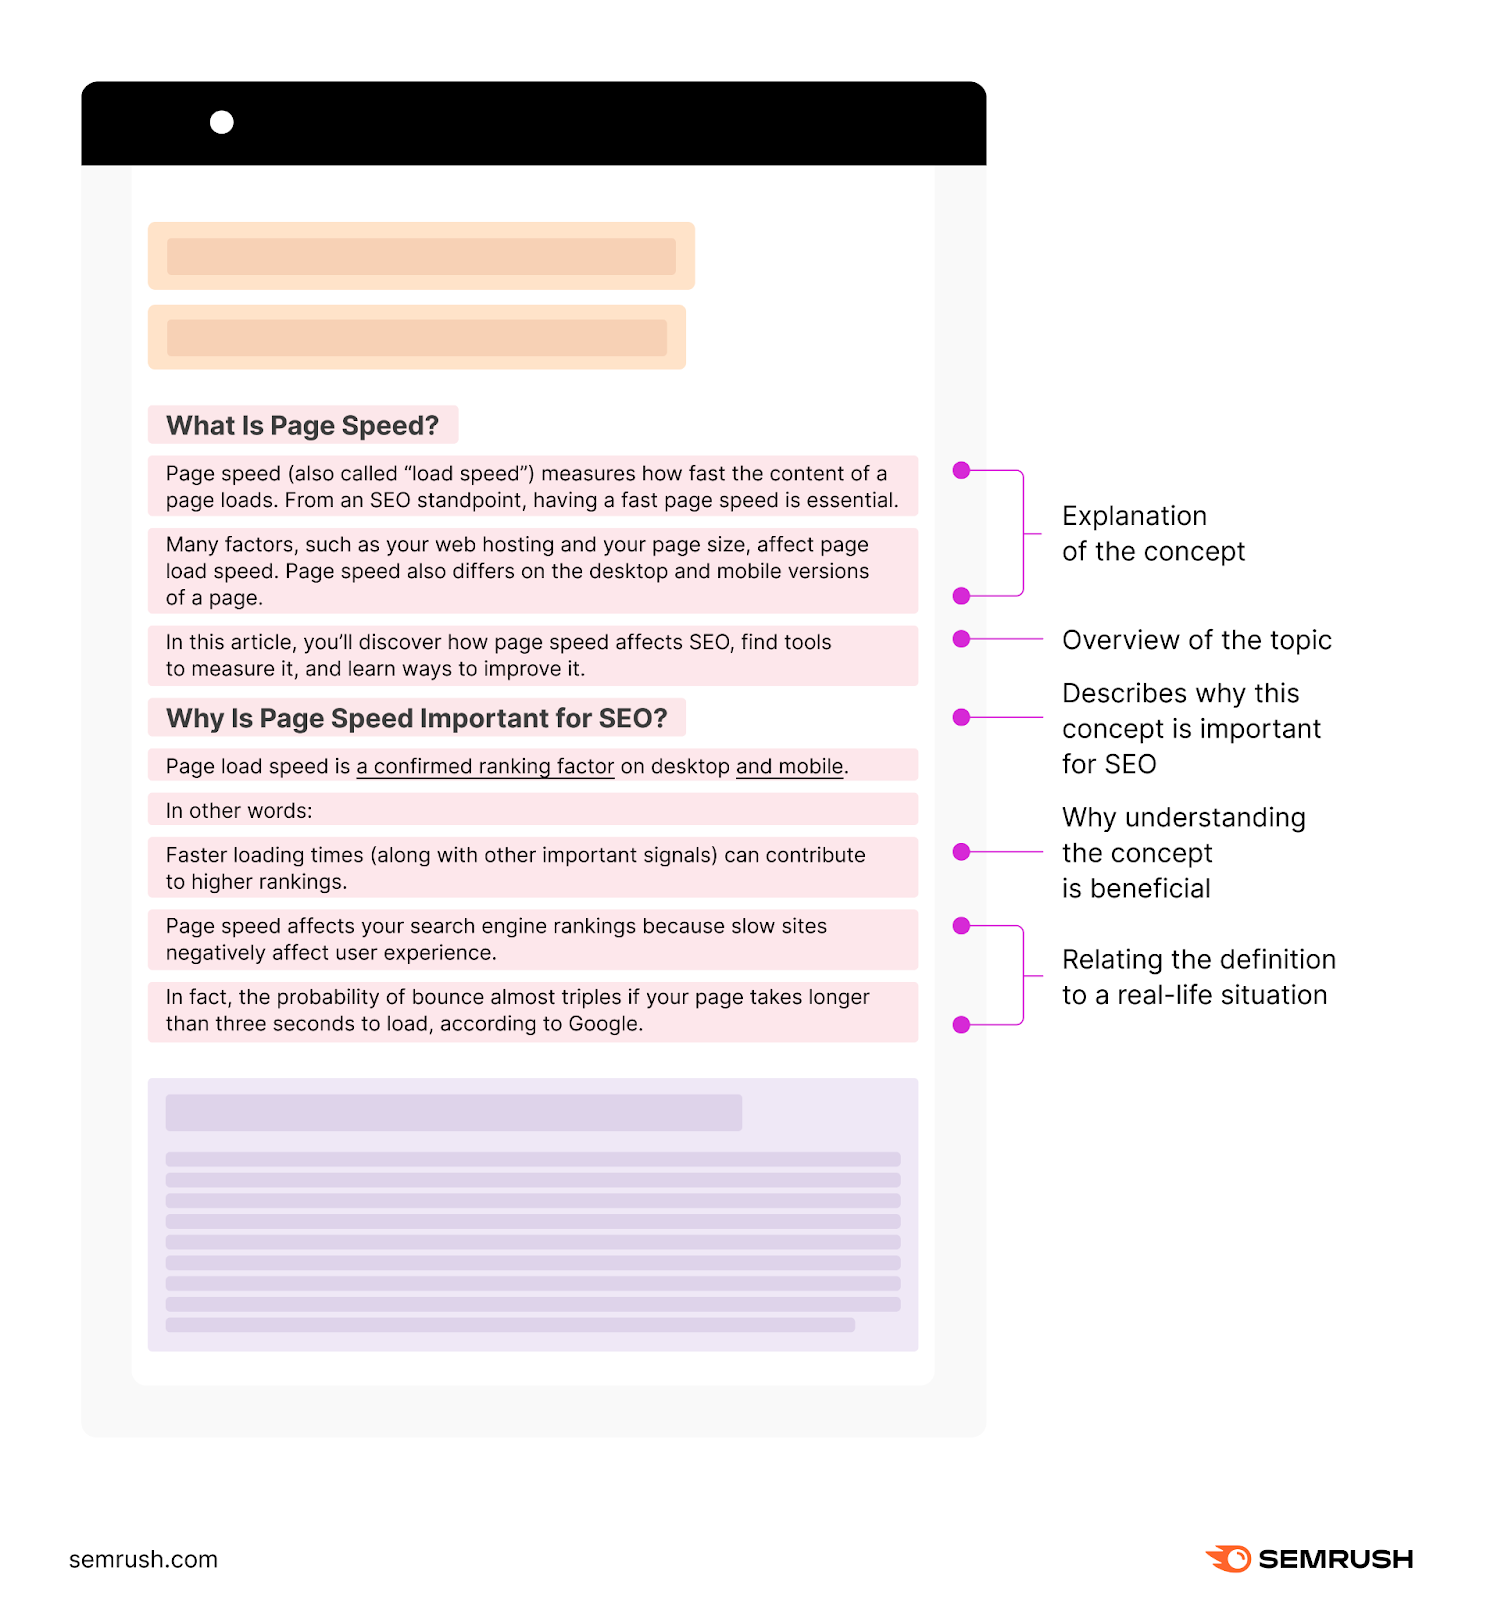 An infographic laying out and explaining "What is Page Speed" and "Why is Page Speed Important for SEO" sections